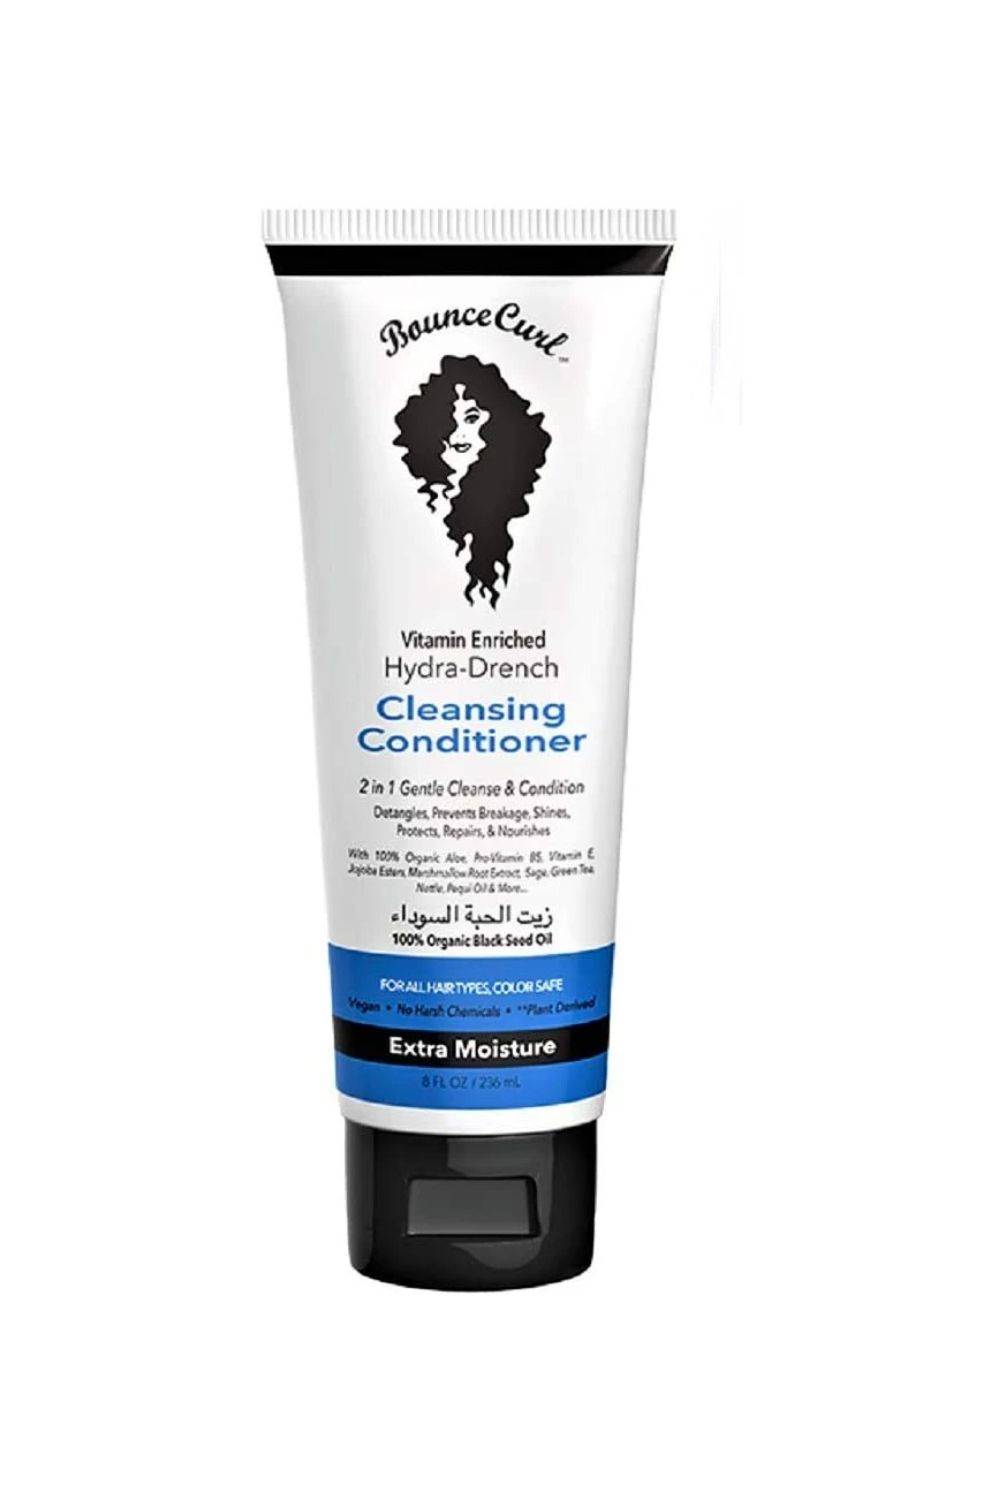 Bounce Curl Cleansing Conditioner 